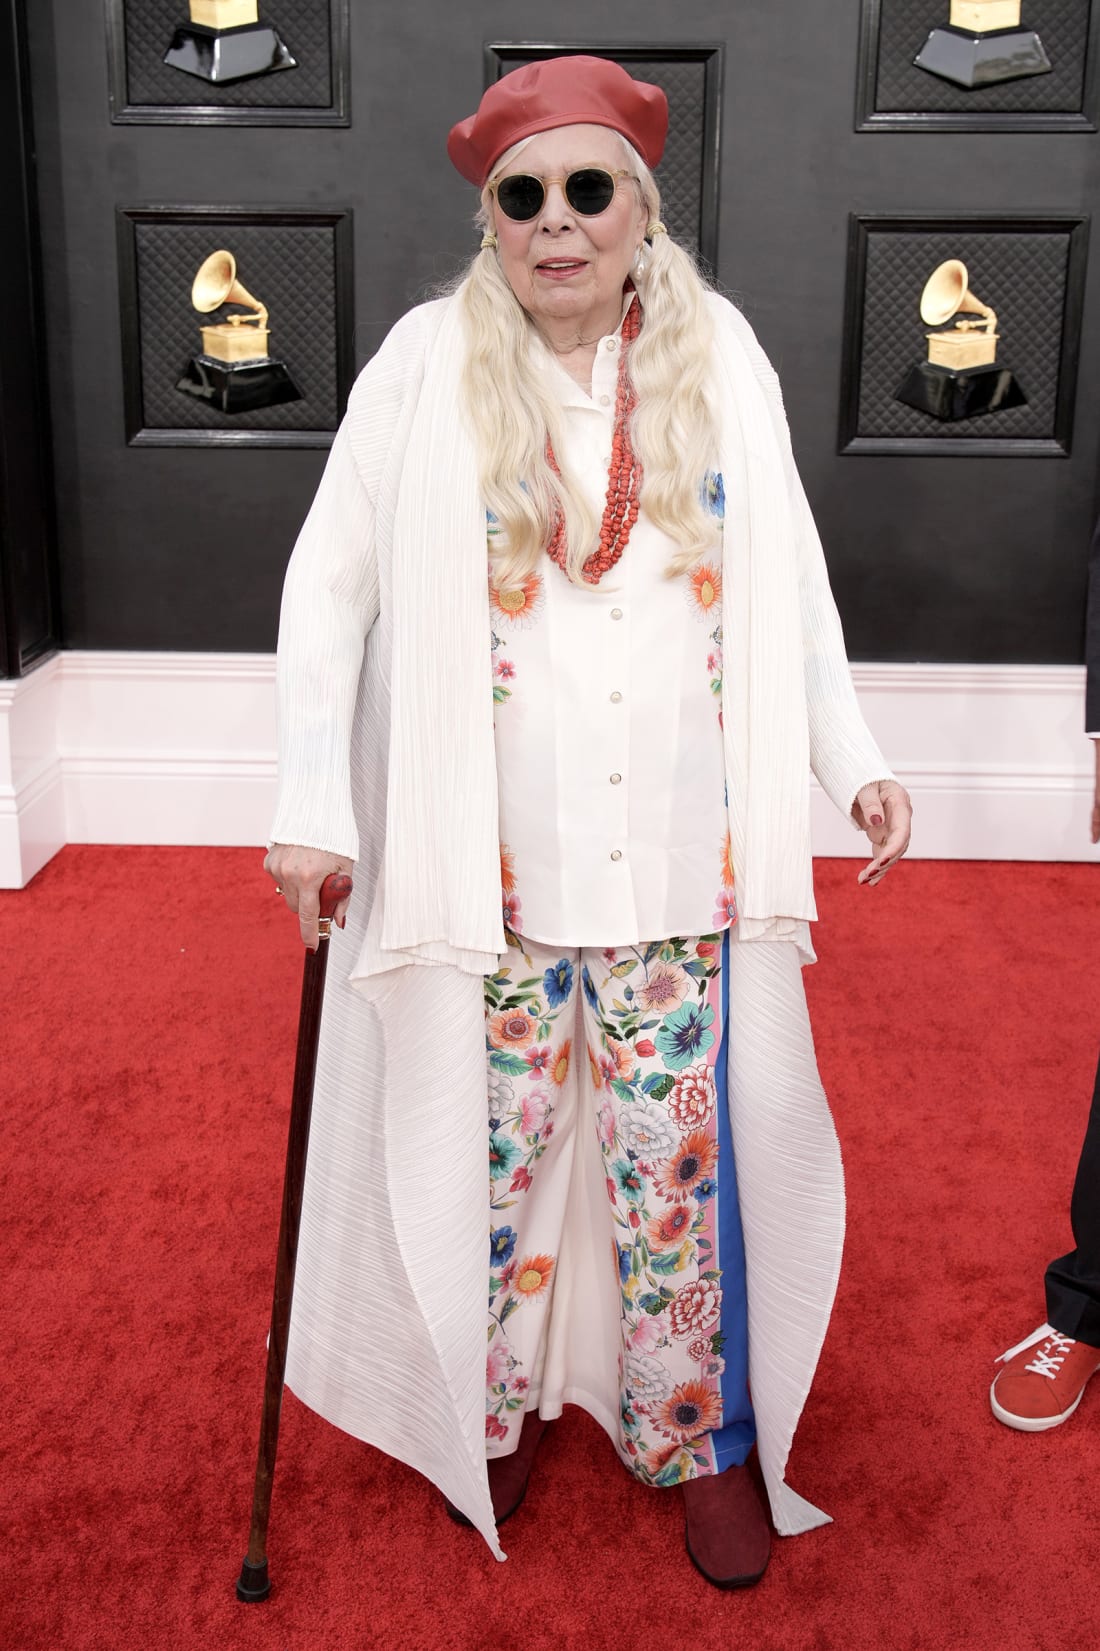 Joni Mitchell wore an all-white ensemble and a signature beret.